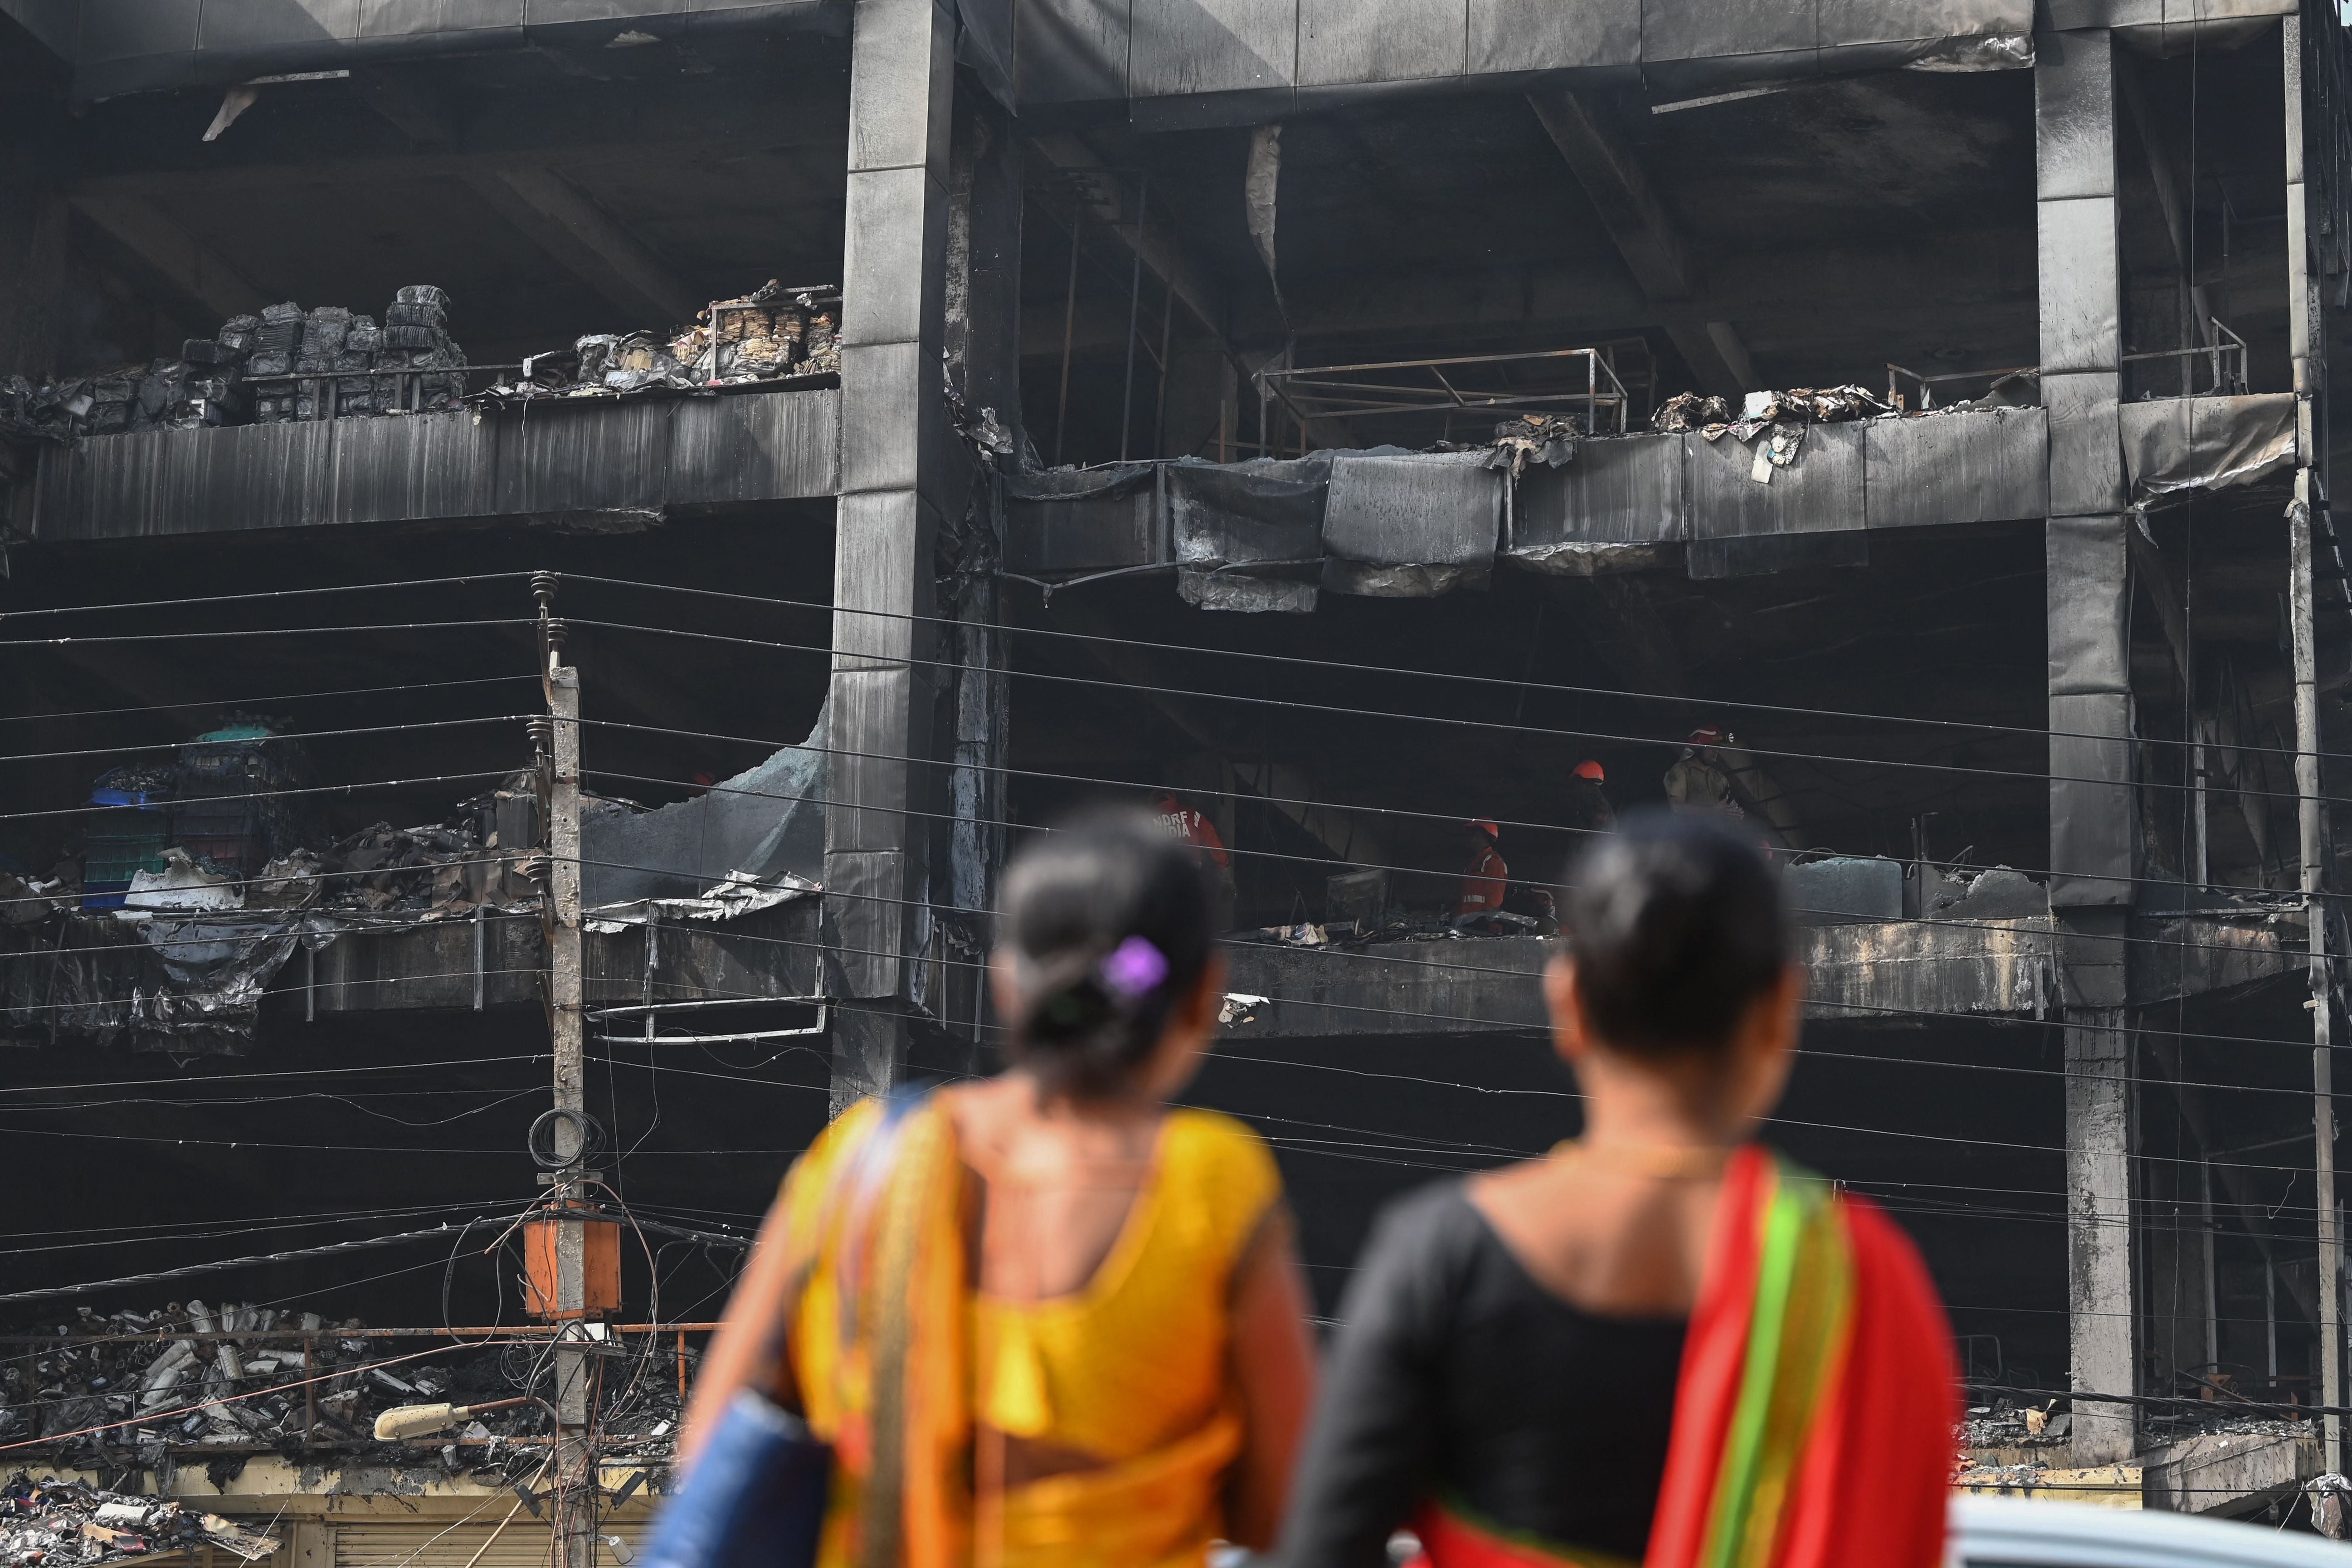 Onlookers gather outside a burn down commercial building a day after a fire broke out, in New Delhi